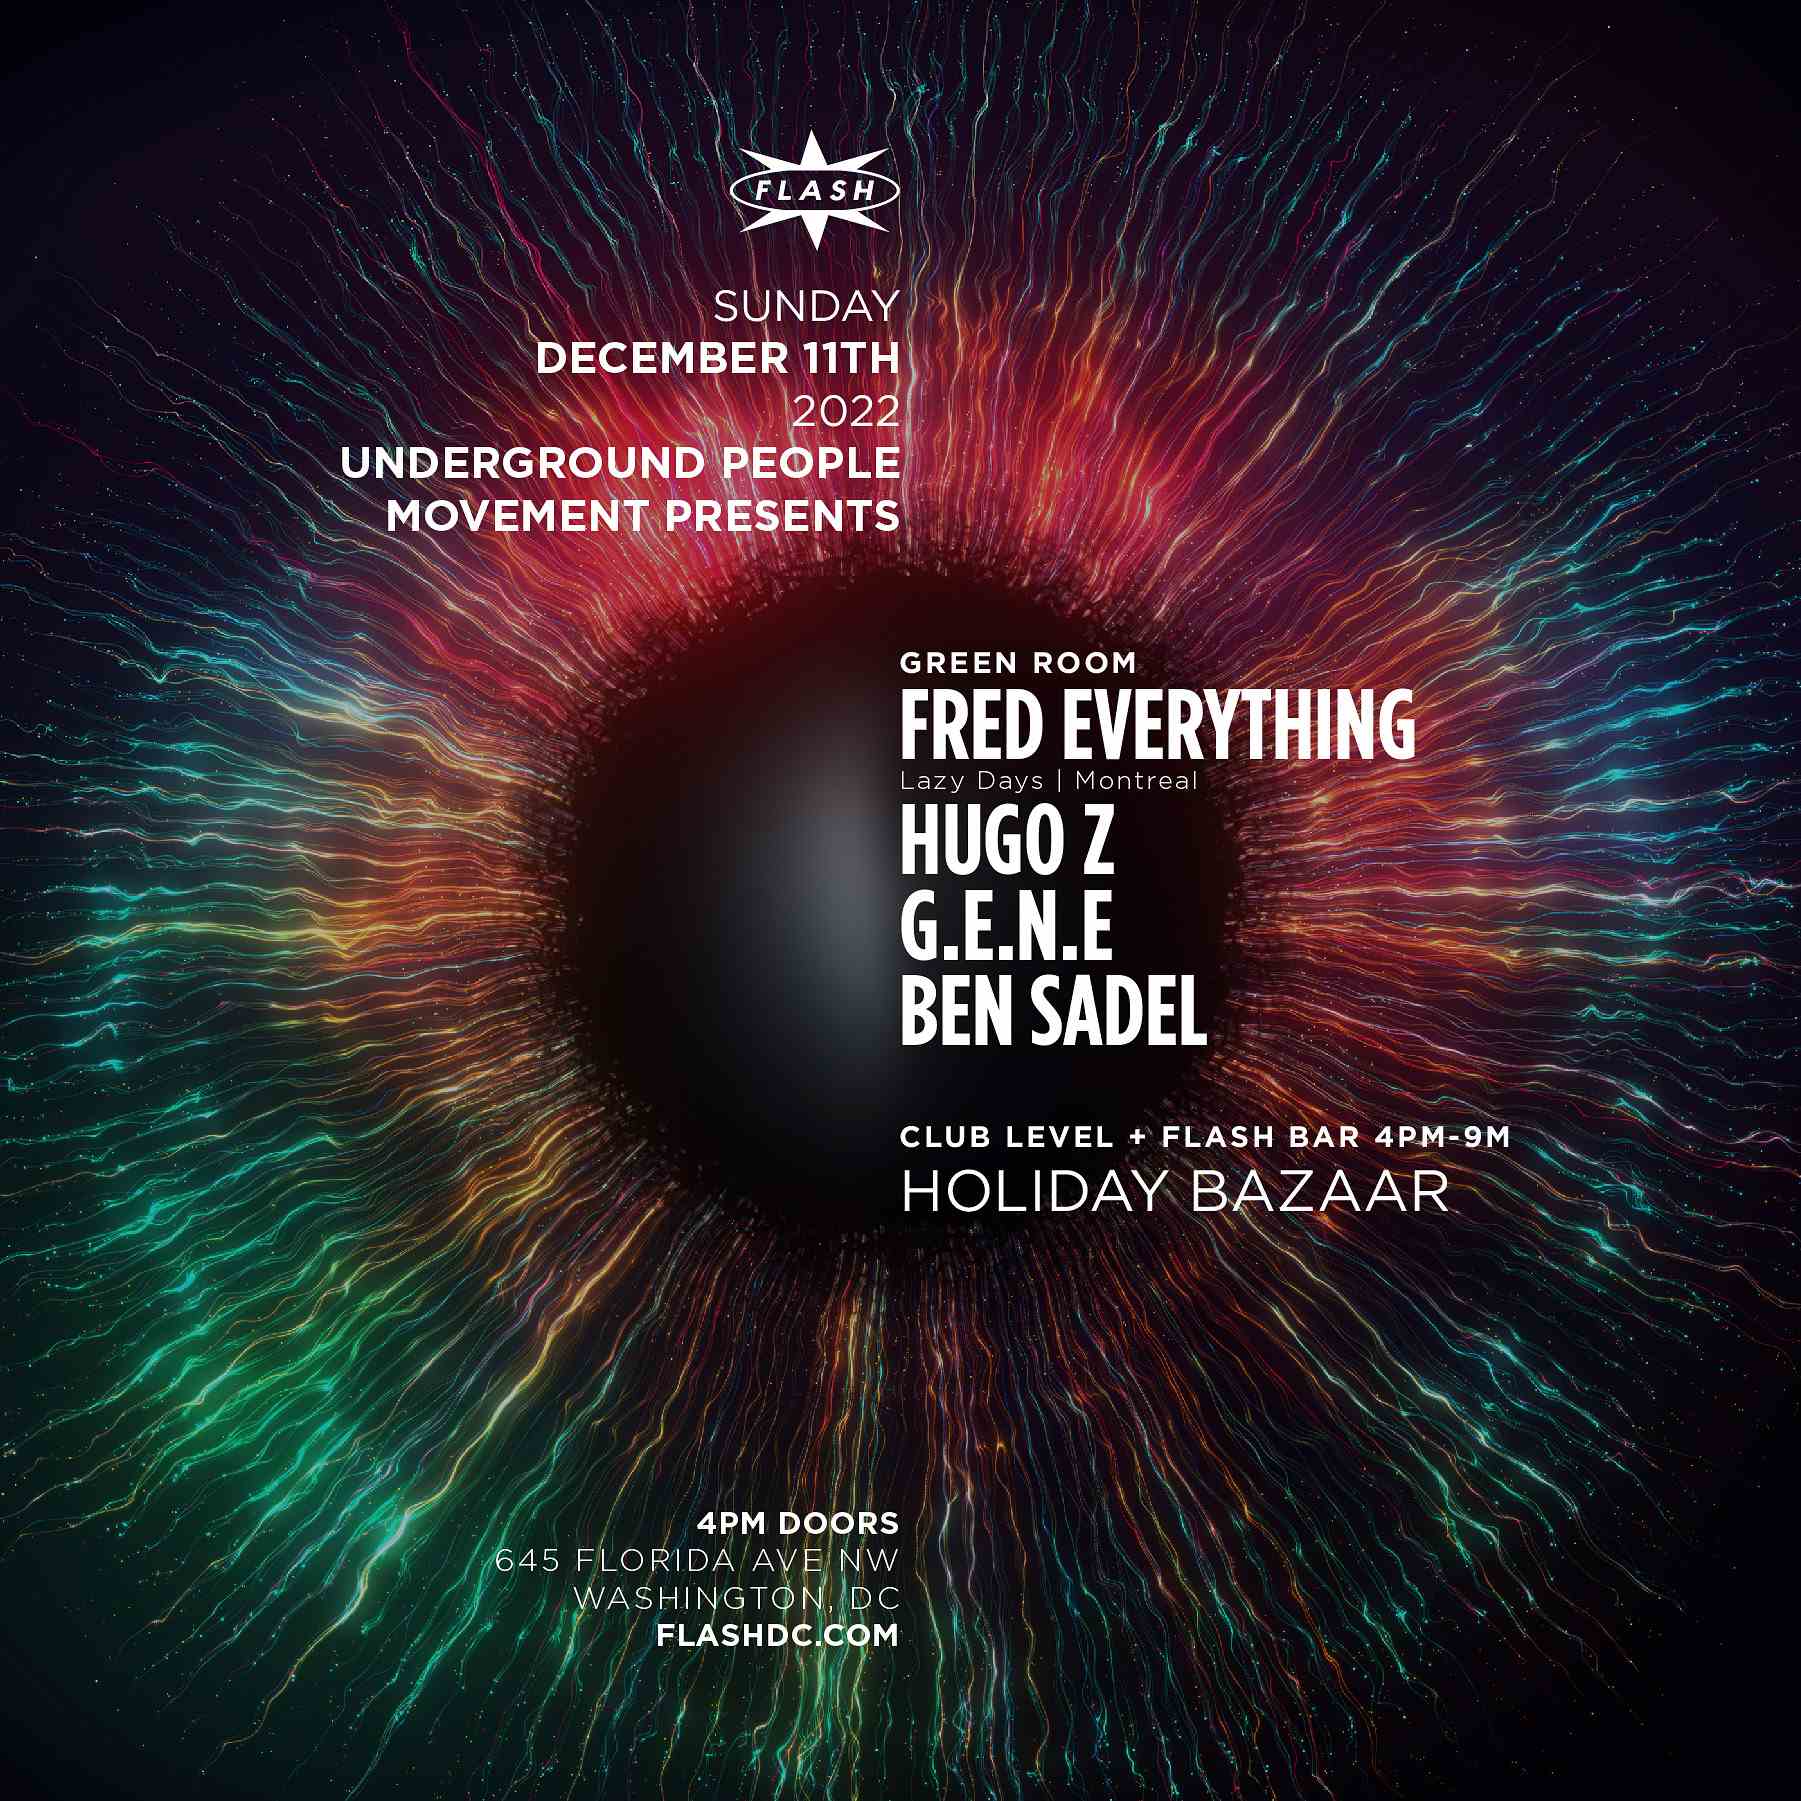 Underground People Movement presents Fred Everything - Hugo Z - G.E.N.E - Ben Sadel event thumbnail